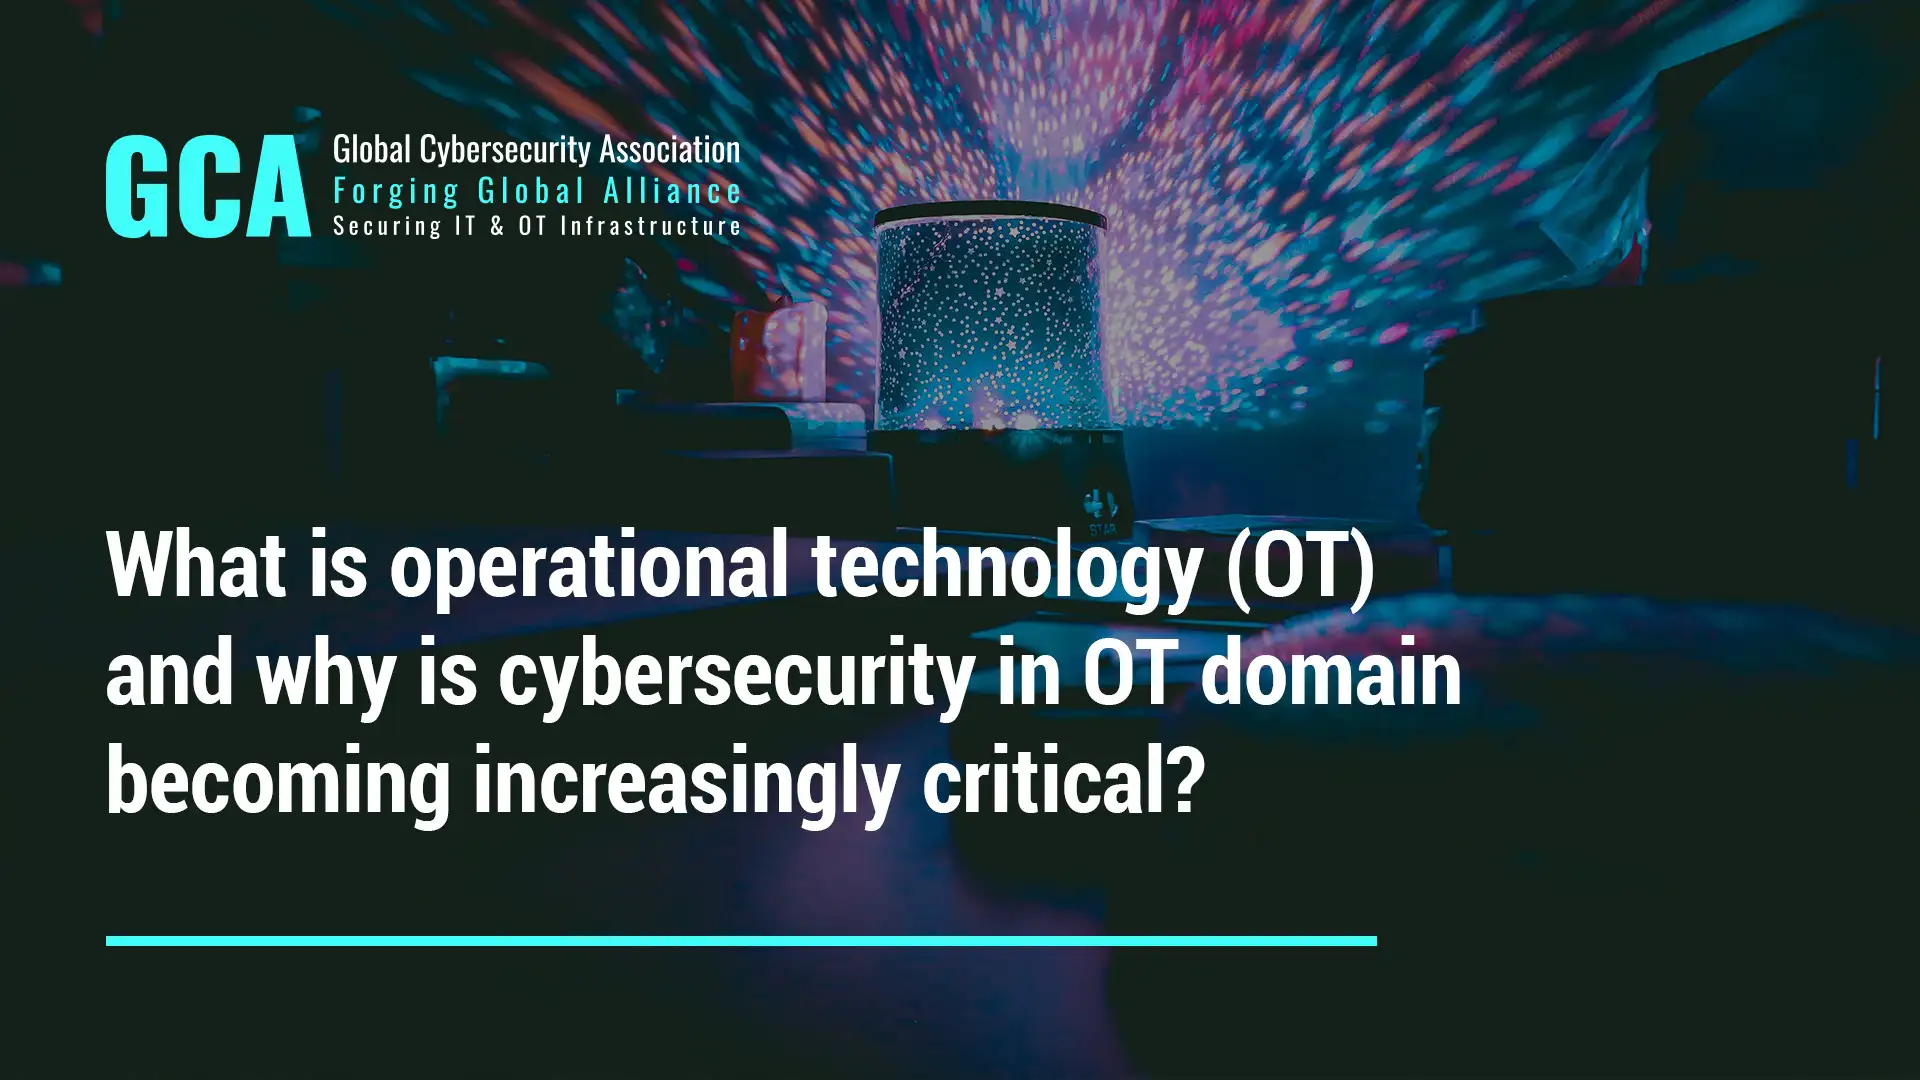 What is operational technology (OT) and why is cybersecurity in OT domain becoming increasingly critical